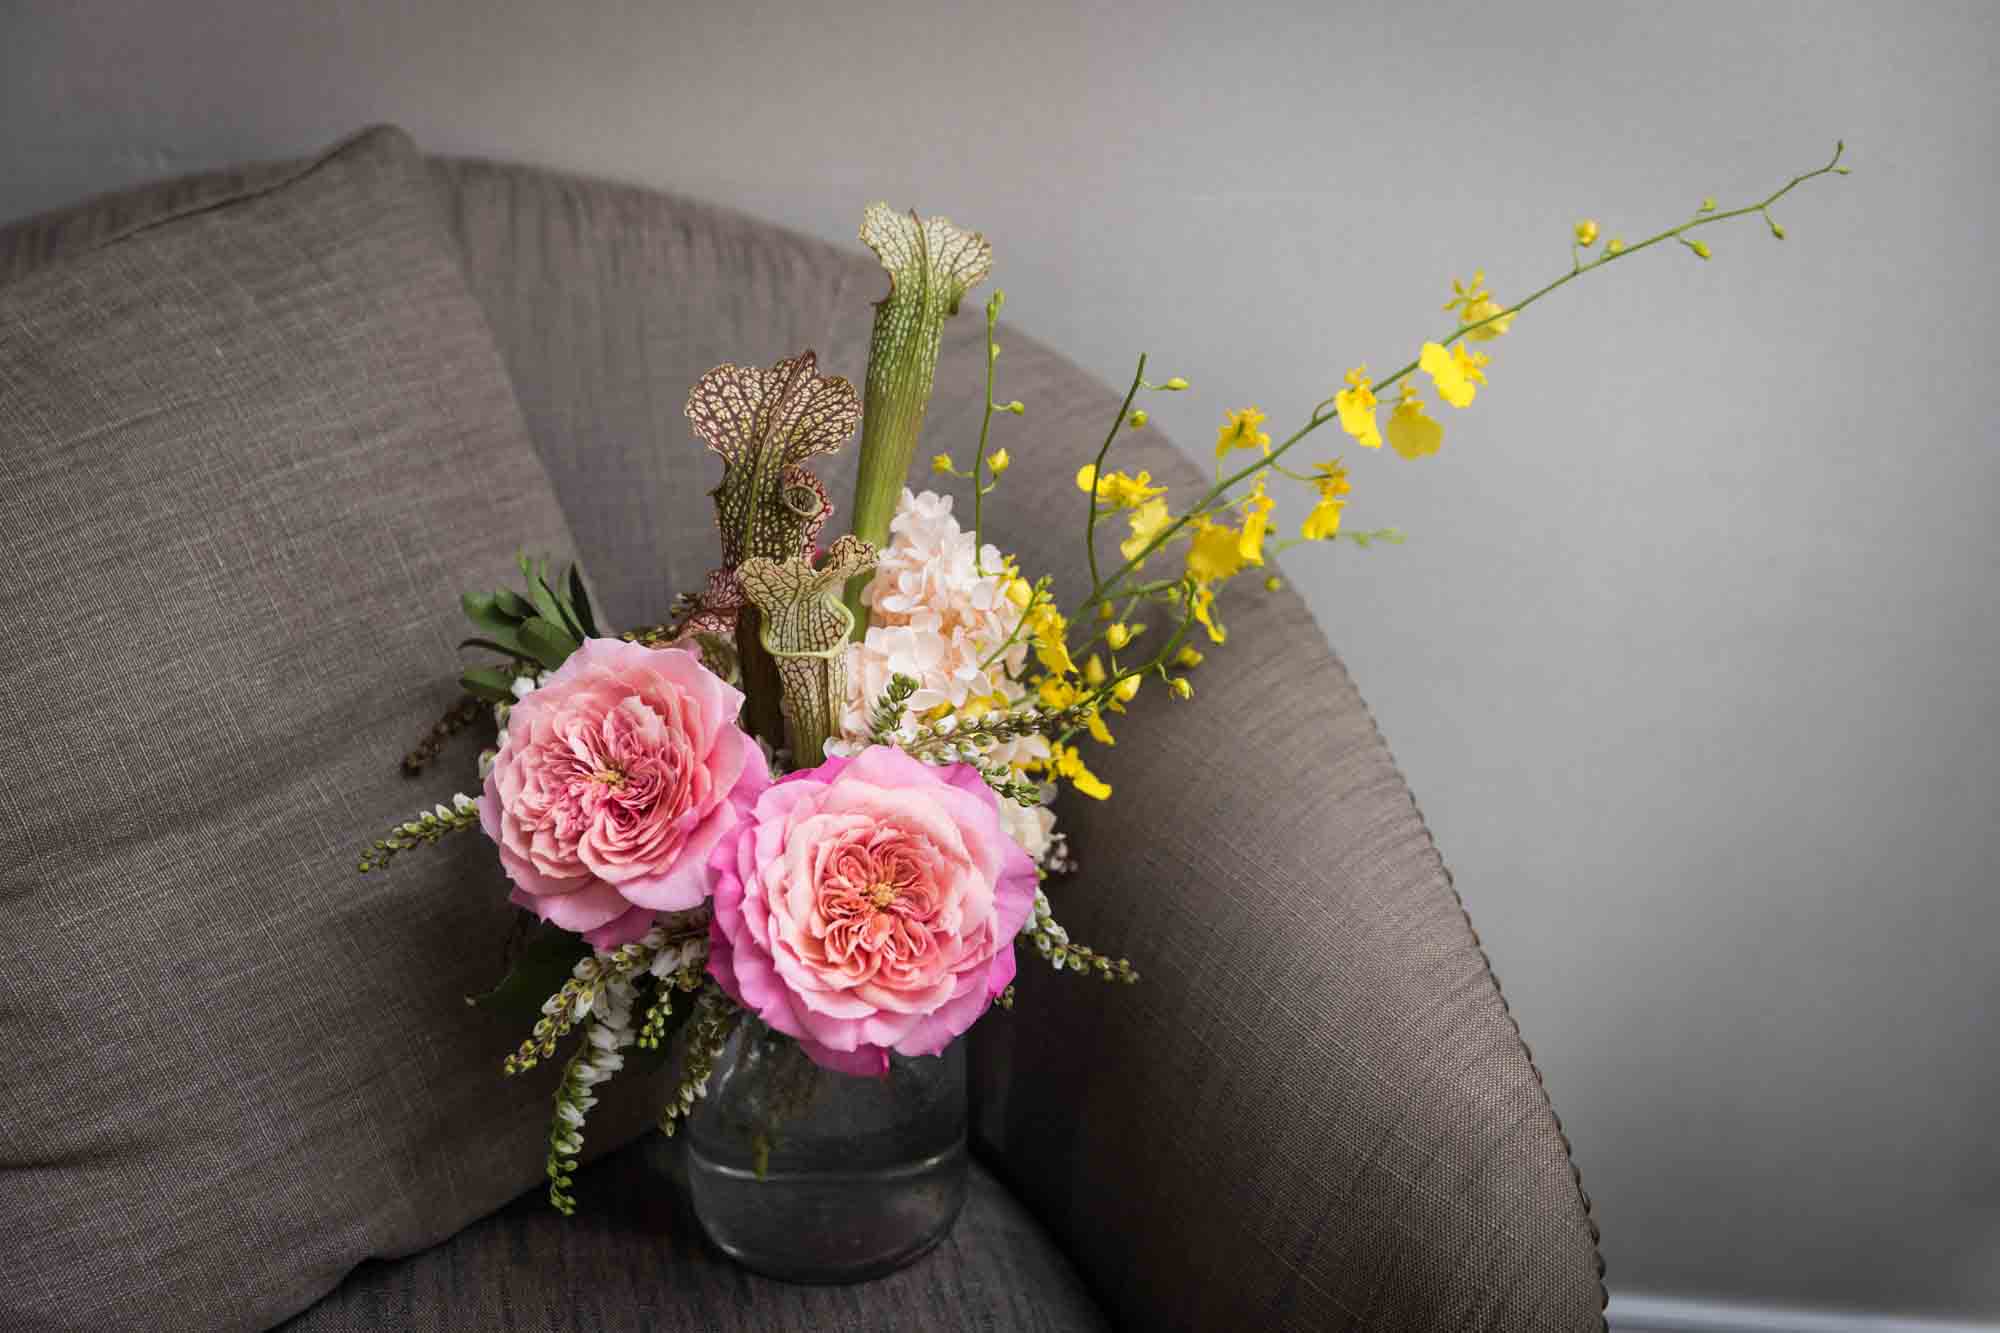 Colorful flower bouquet with two pink roses and spray of yellow flowers on beige chair